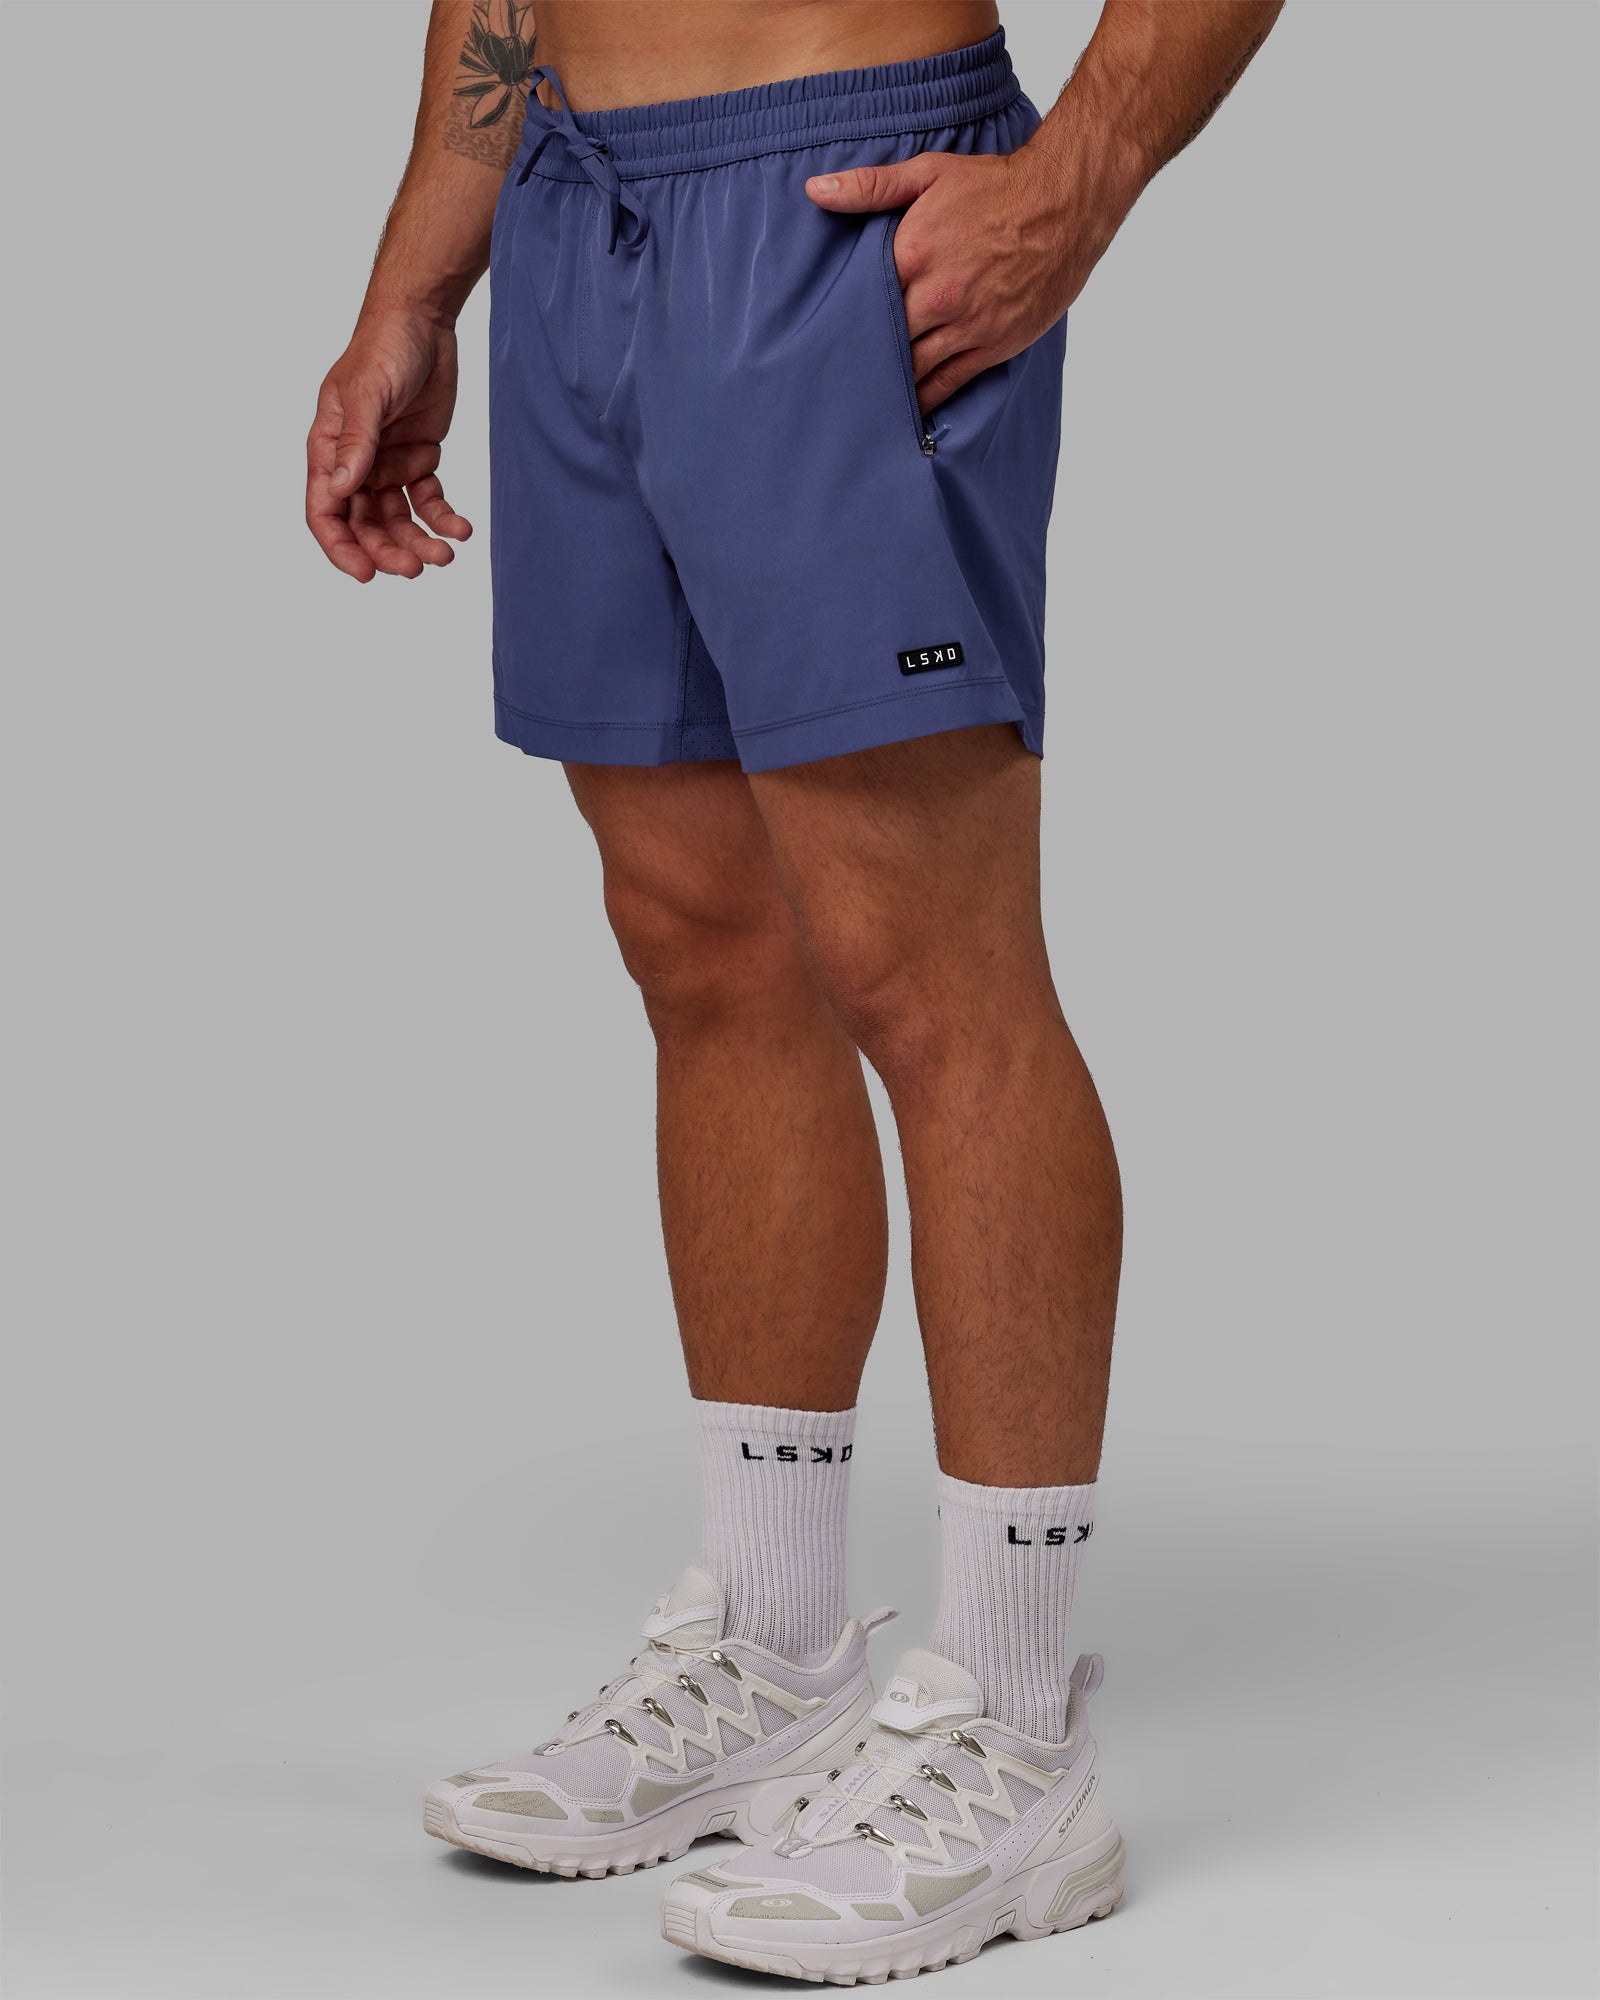 Rep 5 Lined Performance Shorts - Future Dusk